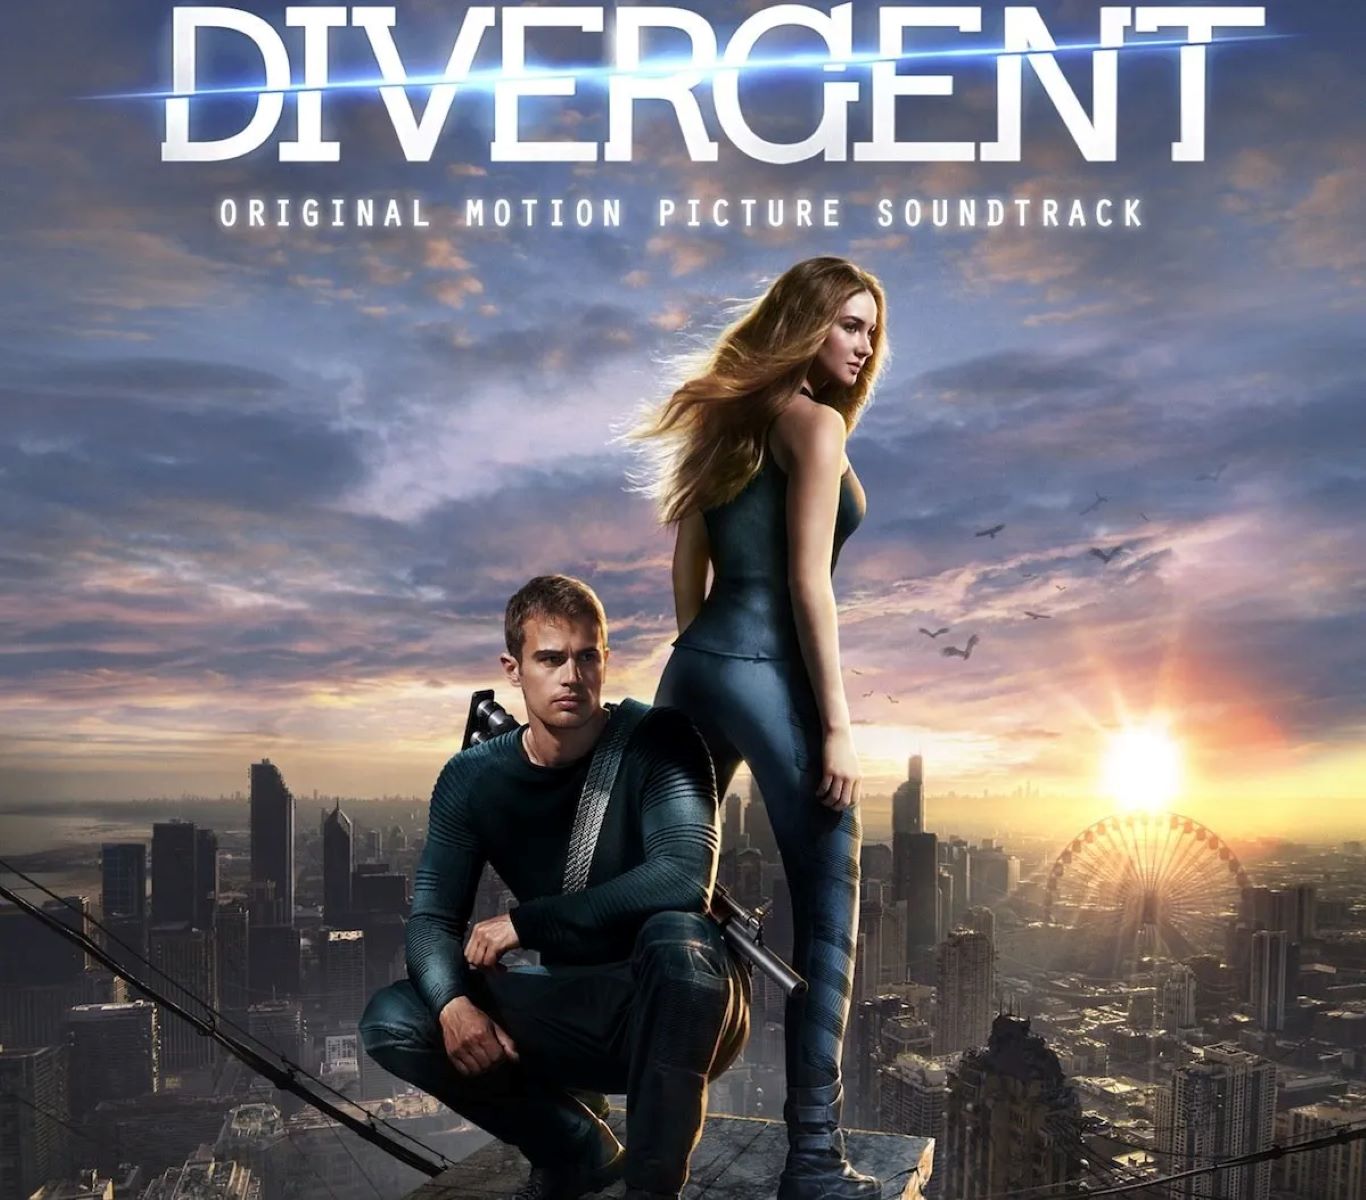 Who Composed Divergent Background Music